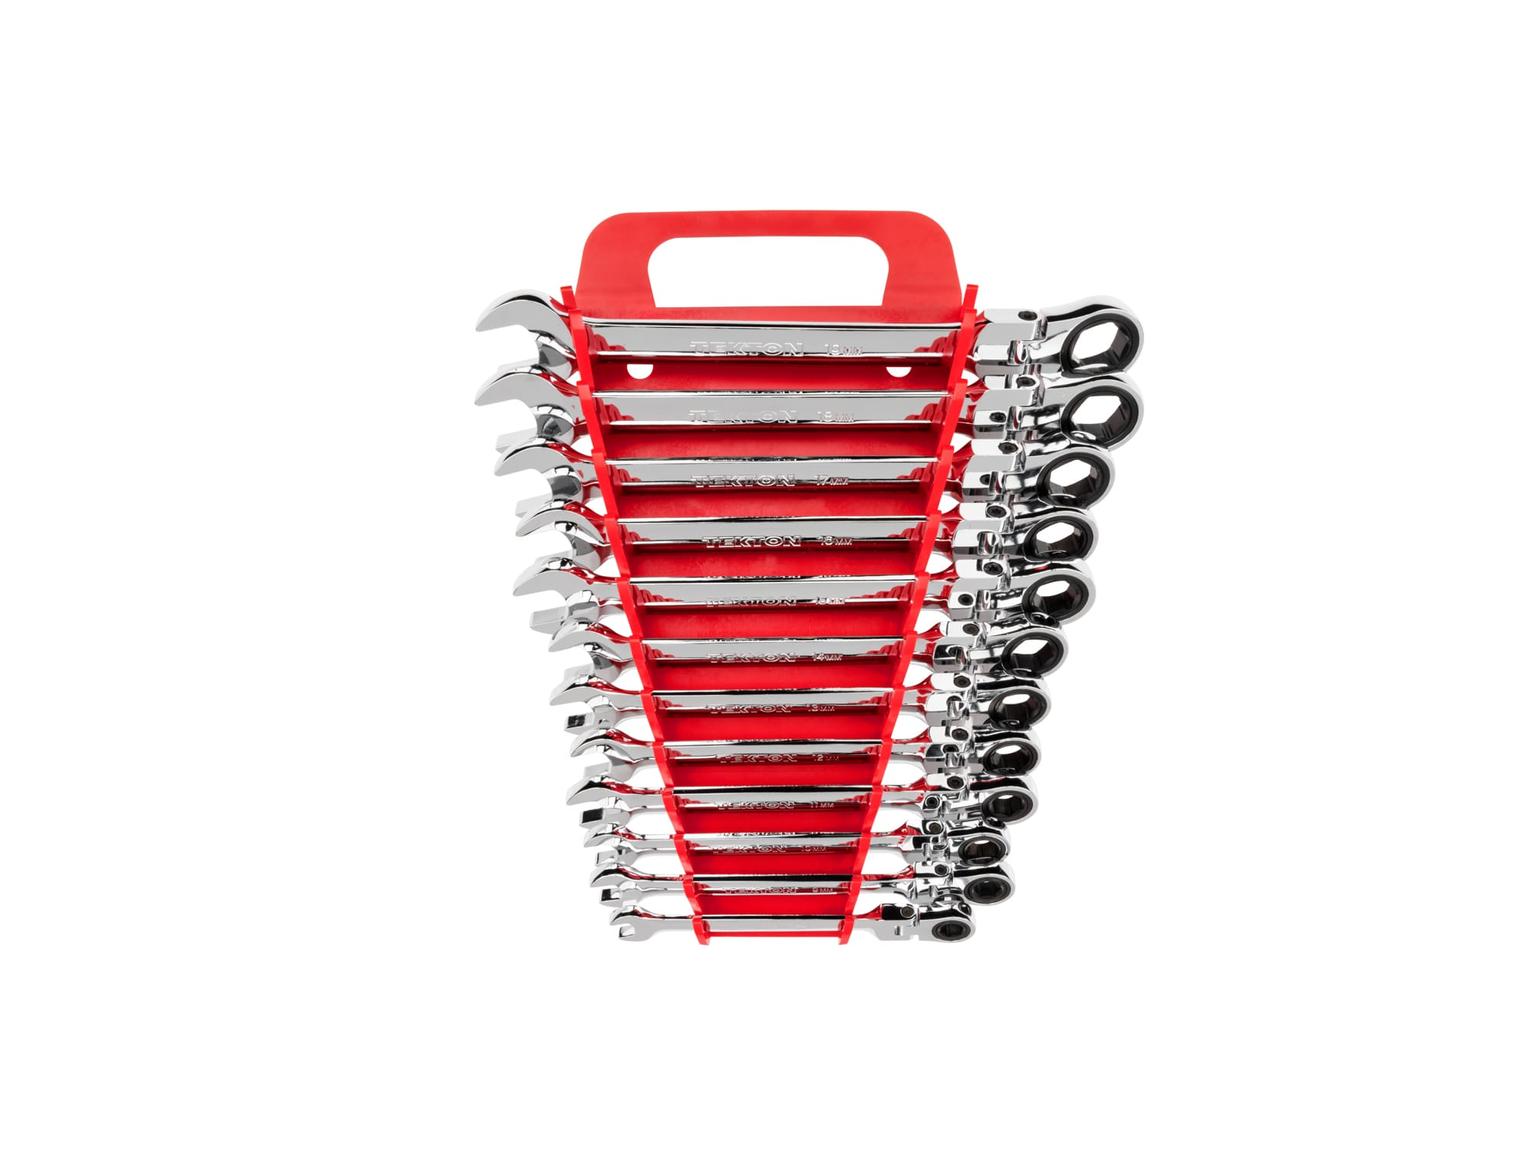 TEKTON WRN57170-T Flex Ratcheting Combination Wrench Set with Holder, 12-Piece (8-19 mm)